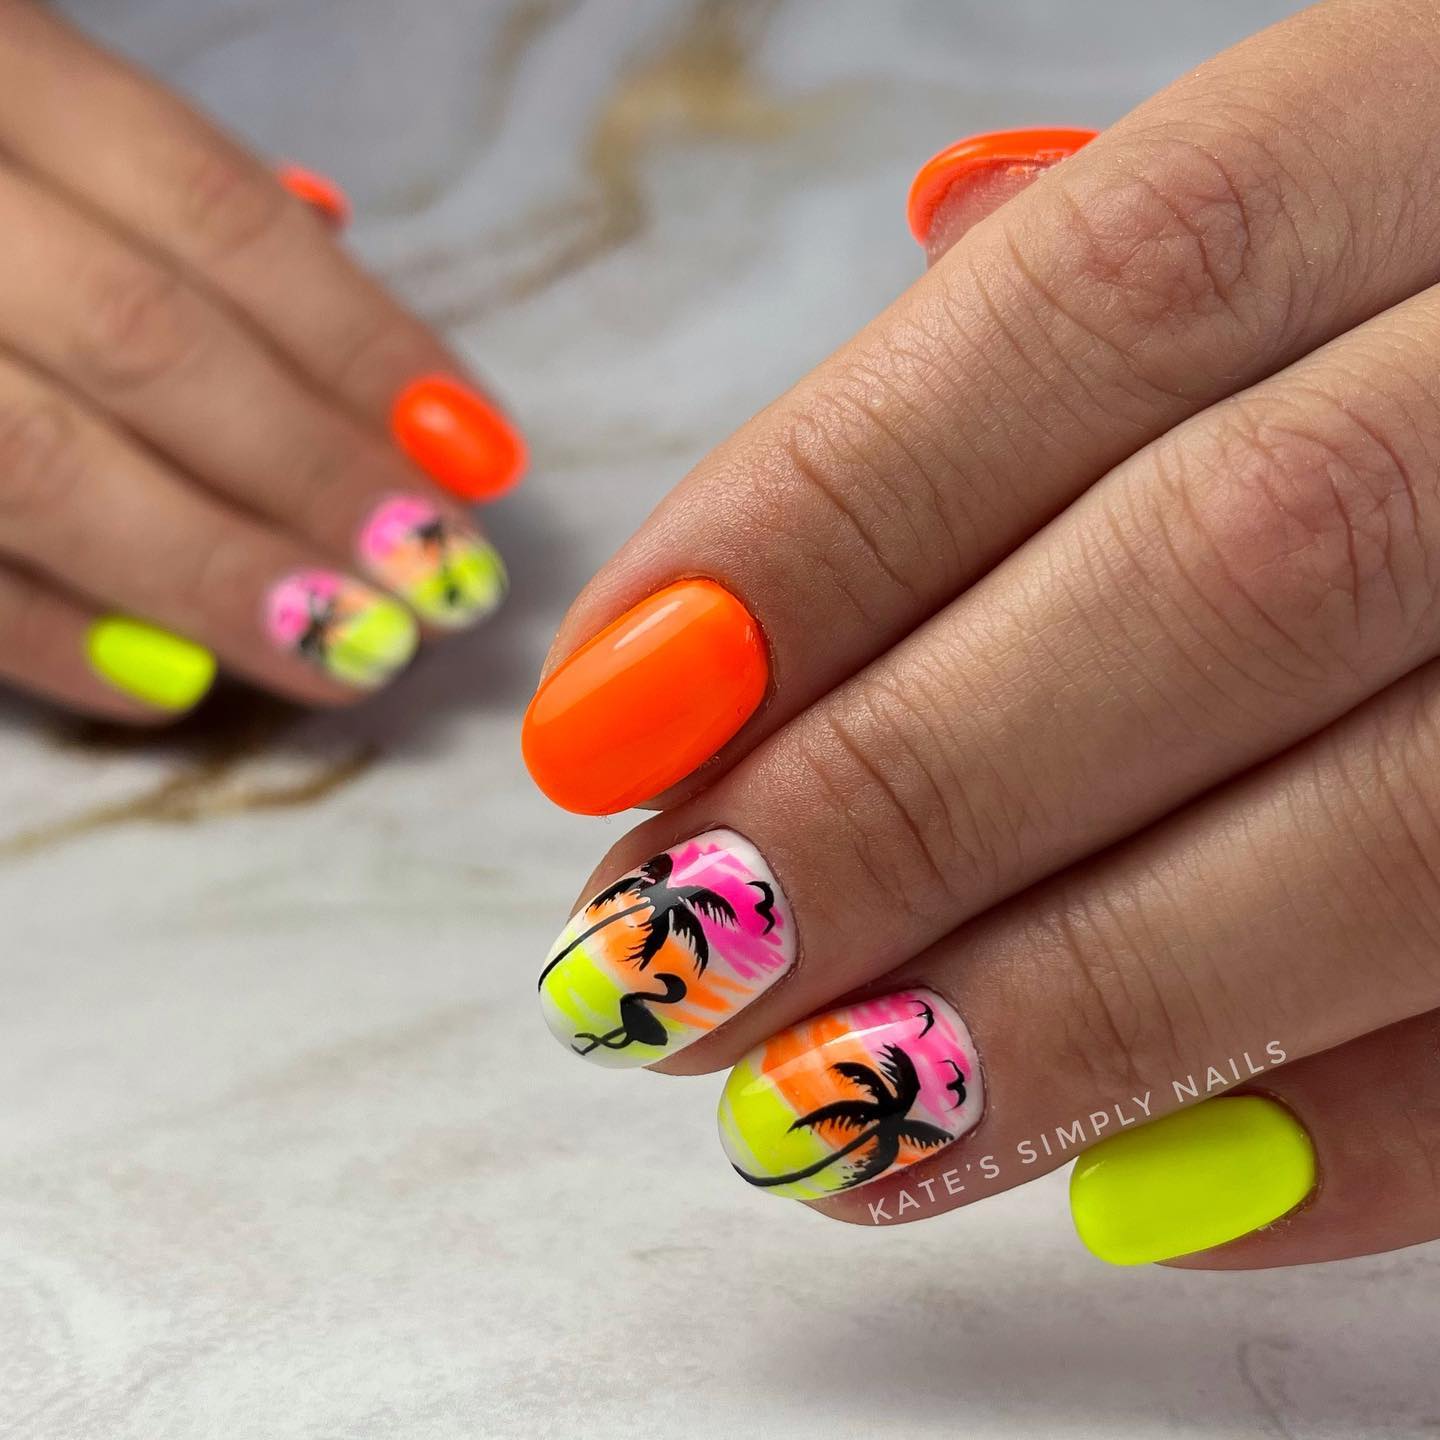 Do you want to get ready for summer with your nails? Then, you should wear colorful nails with a palm and flamingo nail arts.